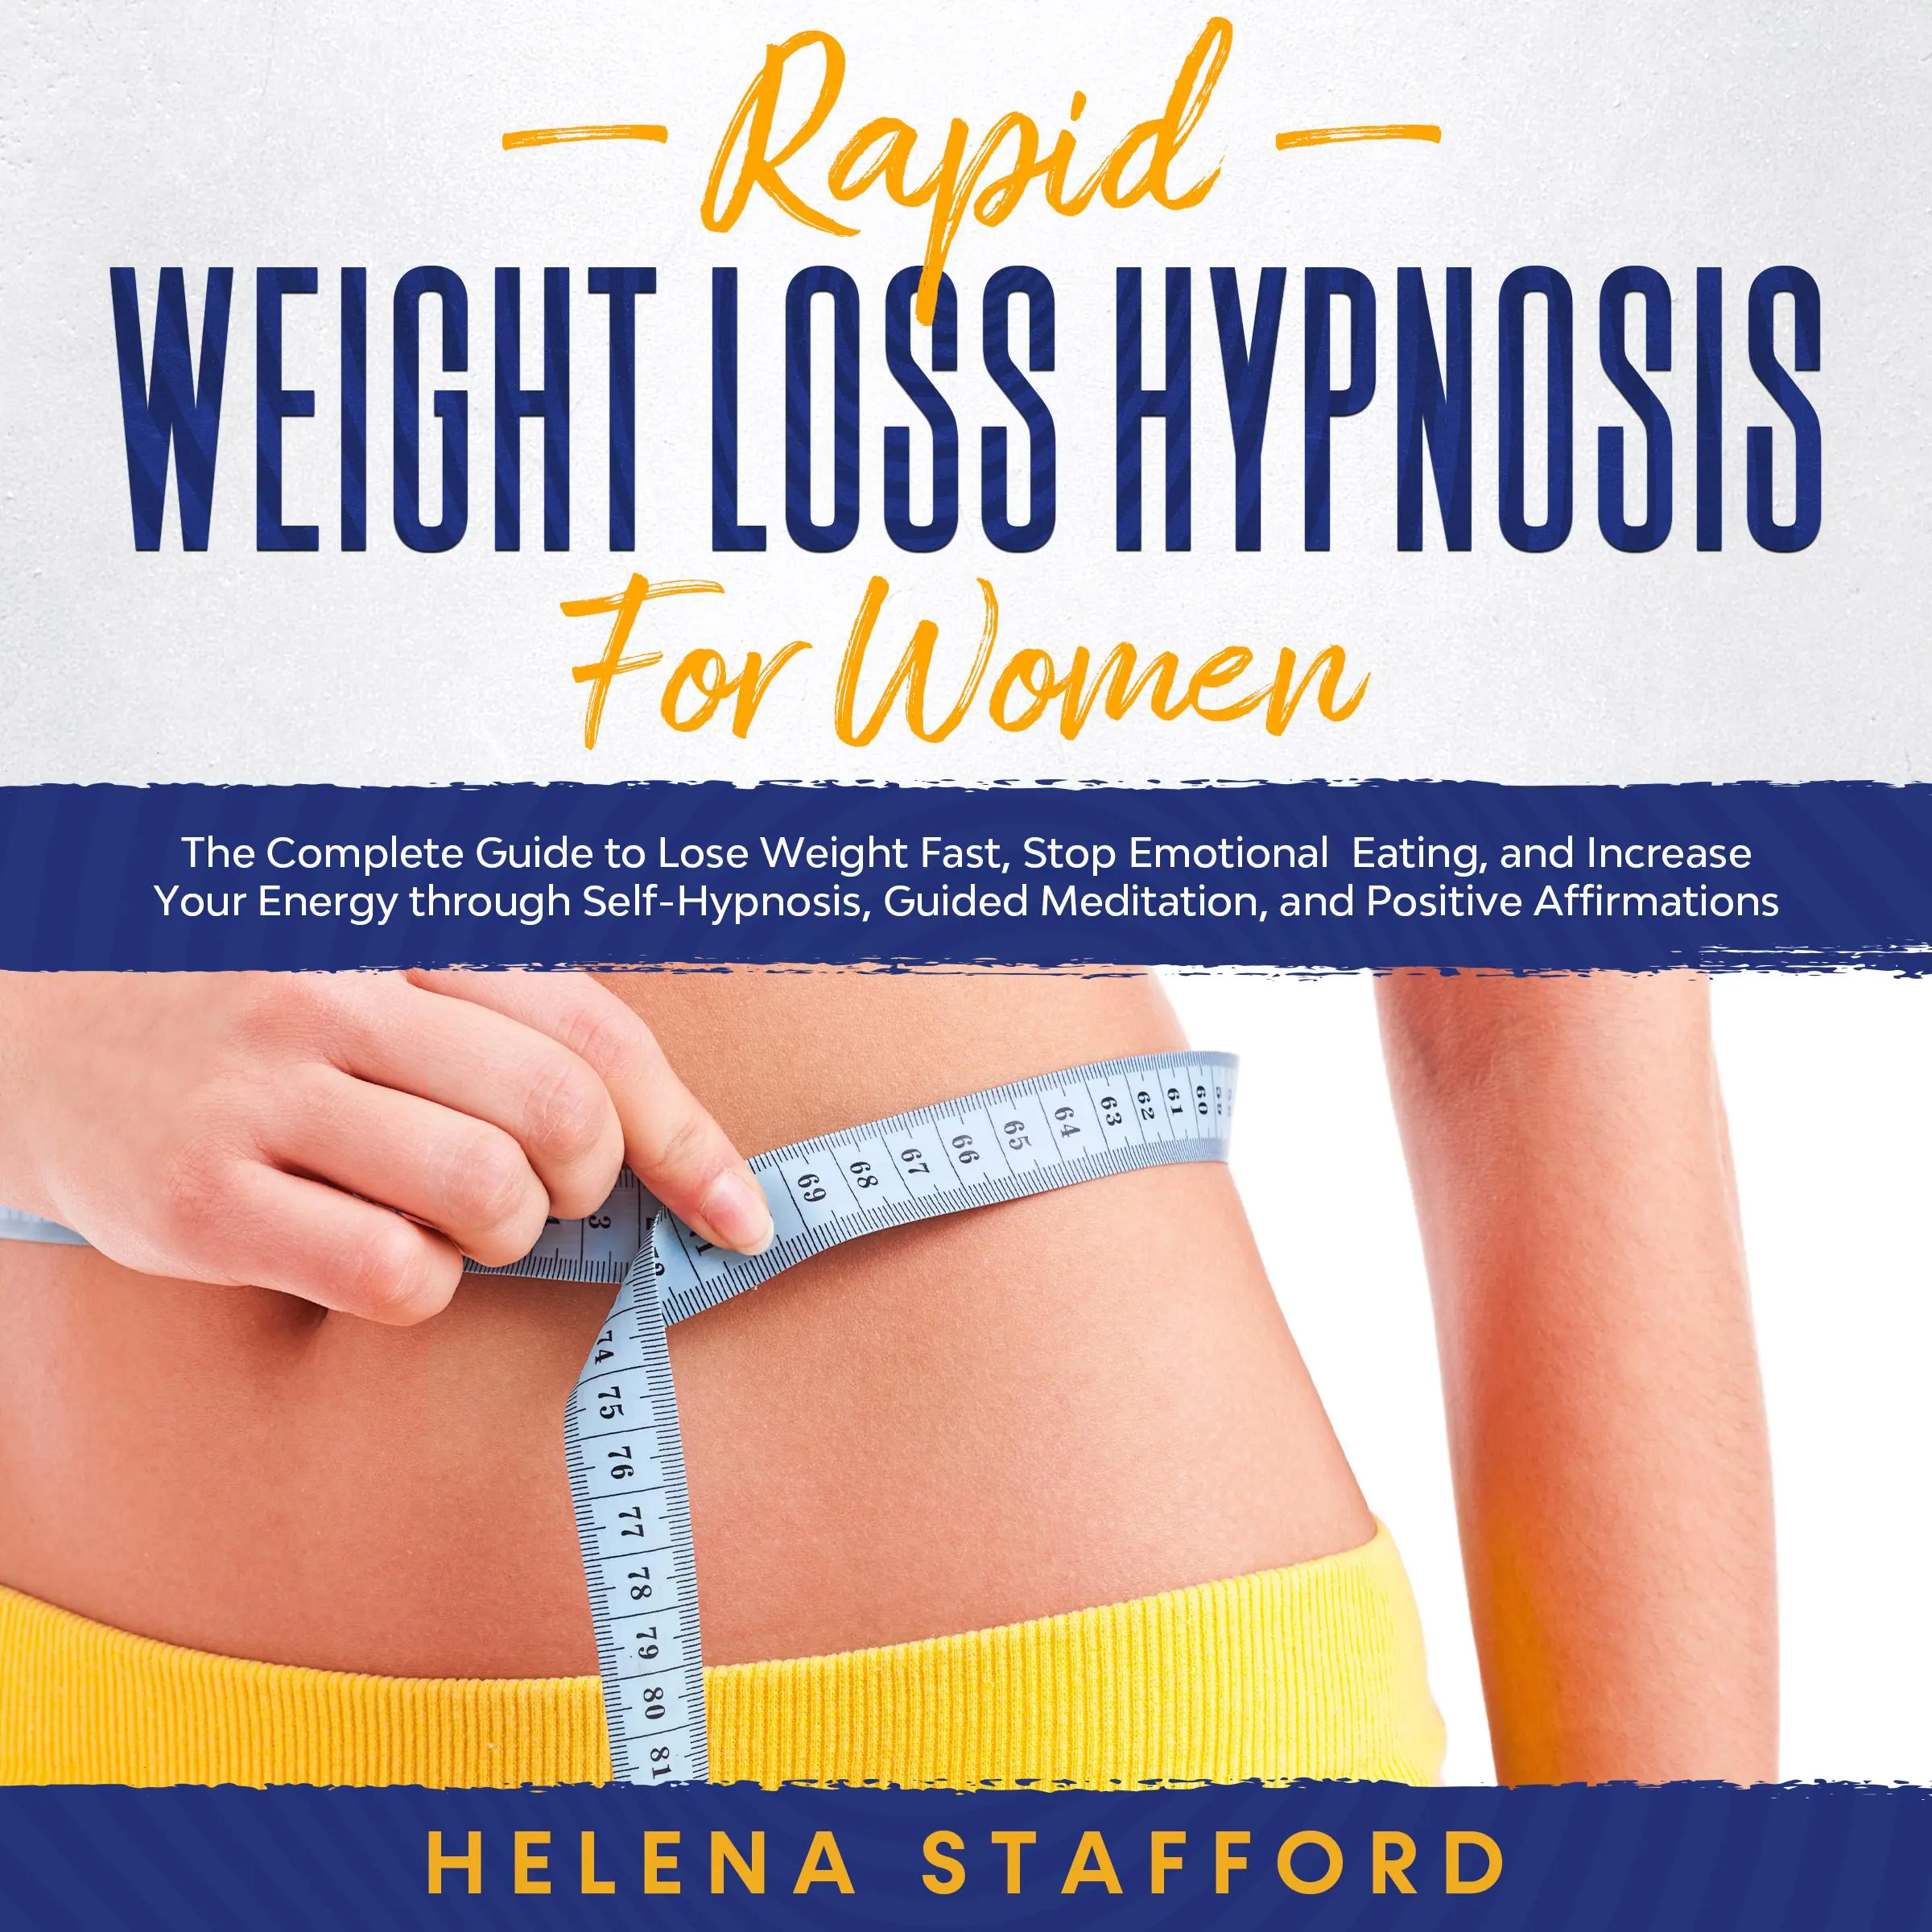 Rapid Weight Loss Hypnosis for Women: The Complete Guide to Lose Weight Fast, Stop Emotional Eating, and Increase Your Energy through Self-Hypnosis, Guided Meditation, and Positive Affirmations Audiobook by Helena Stafford